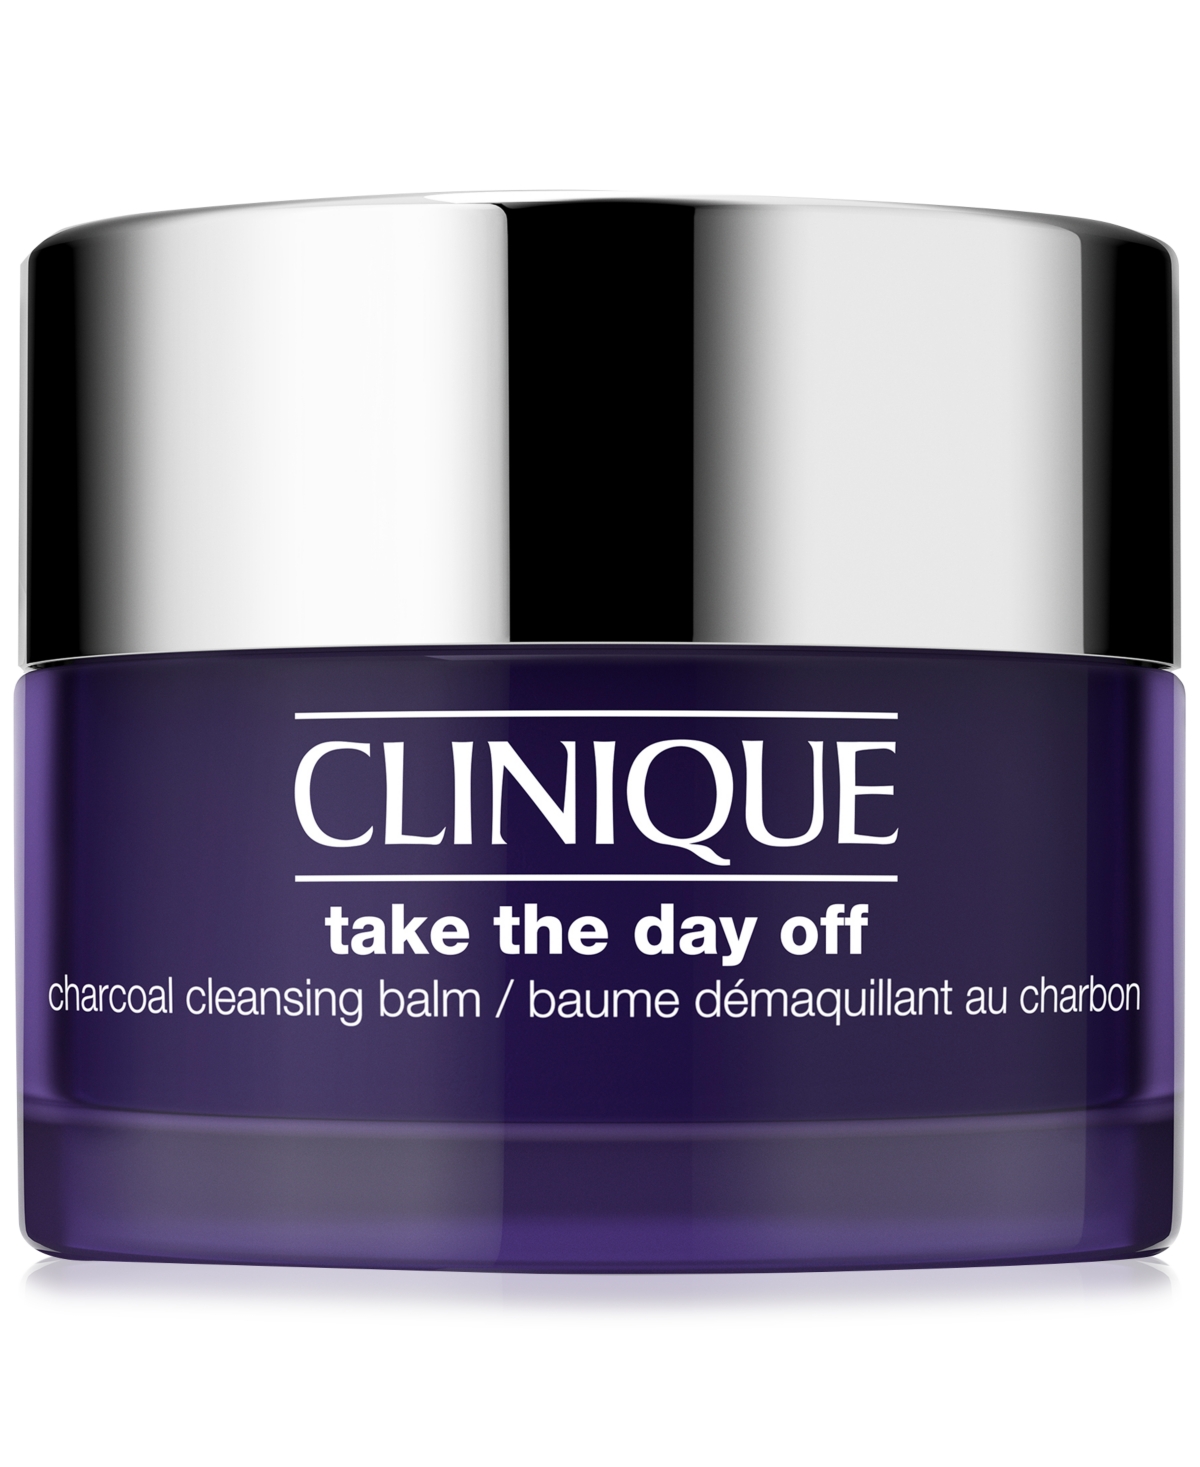 Shop Clinique Take The Day Off Charcoal Cleansing Balm Makeup Remover, 1 Oz.